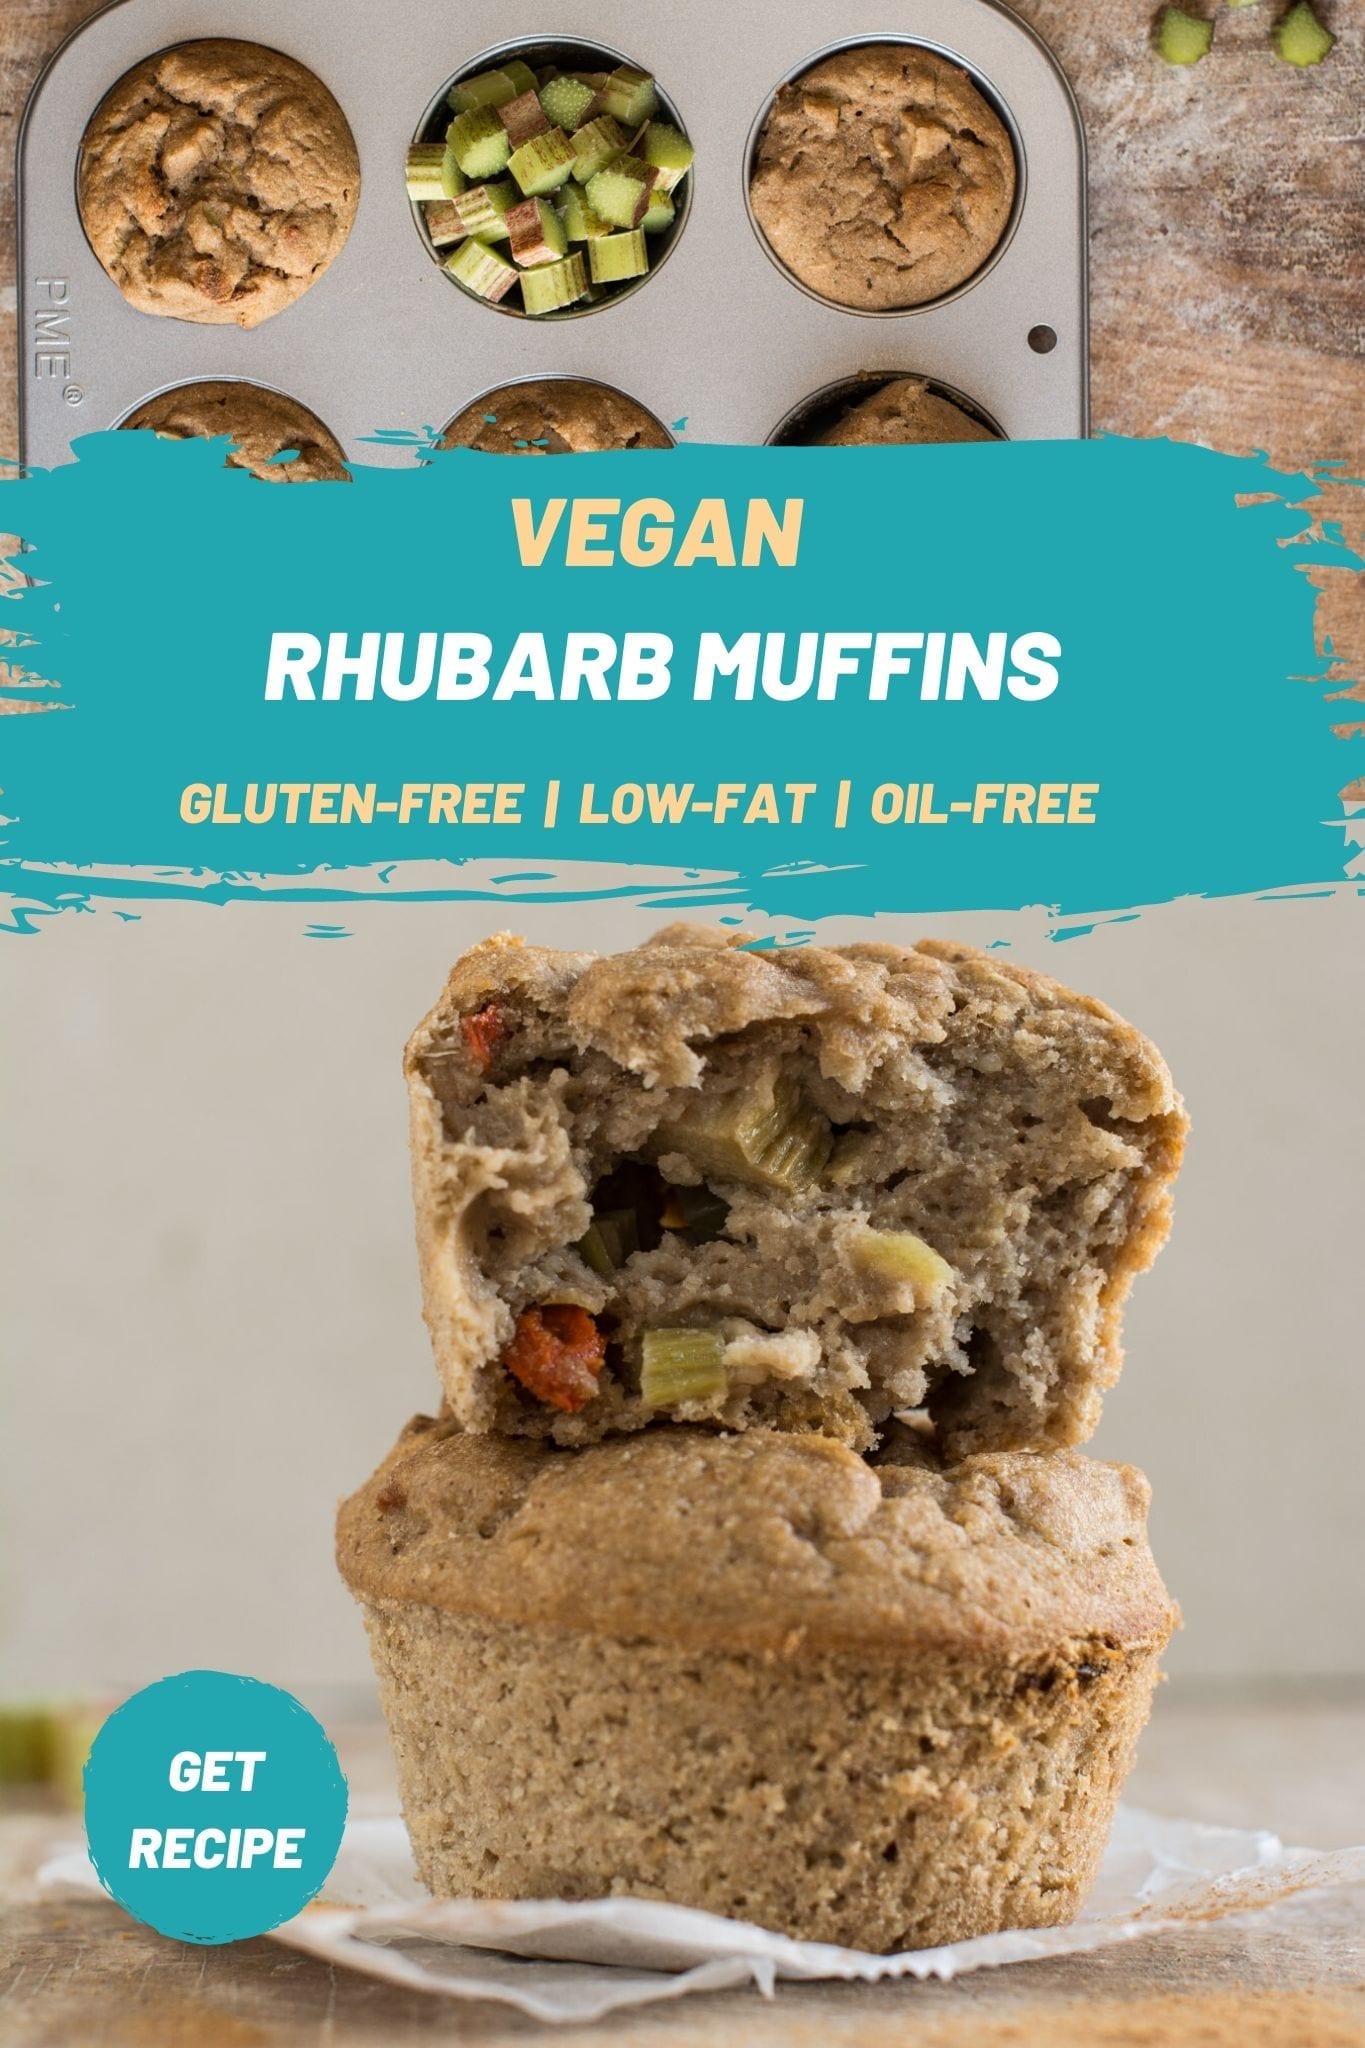 These vegan rhubarb muffins make a perfect breakfast or a lean snack to enjoy in the afternoon with tea. Besides being quick and easy to make, they are also oil-free, sugar-free, dairy-free, gluten-free. 